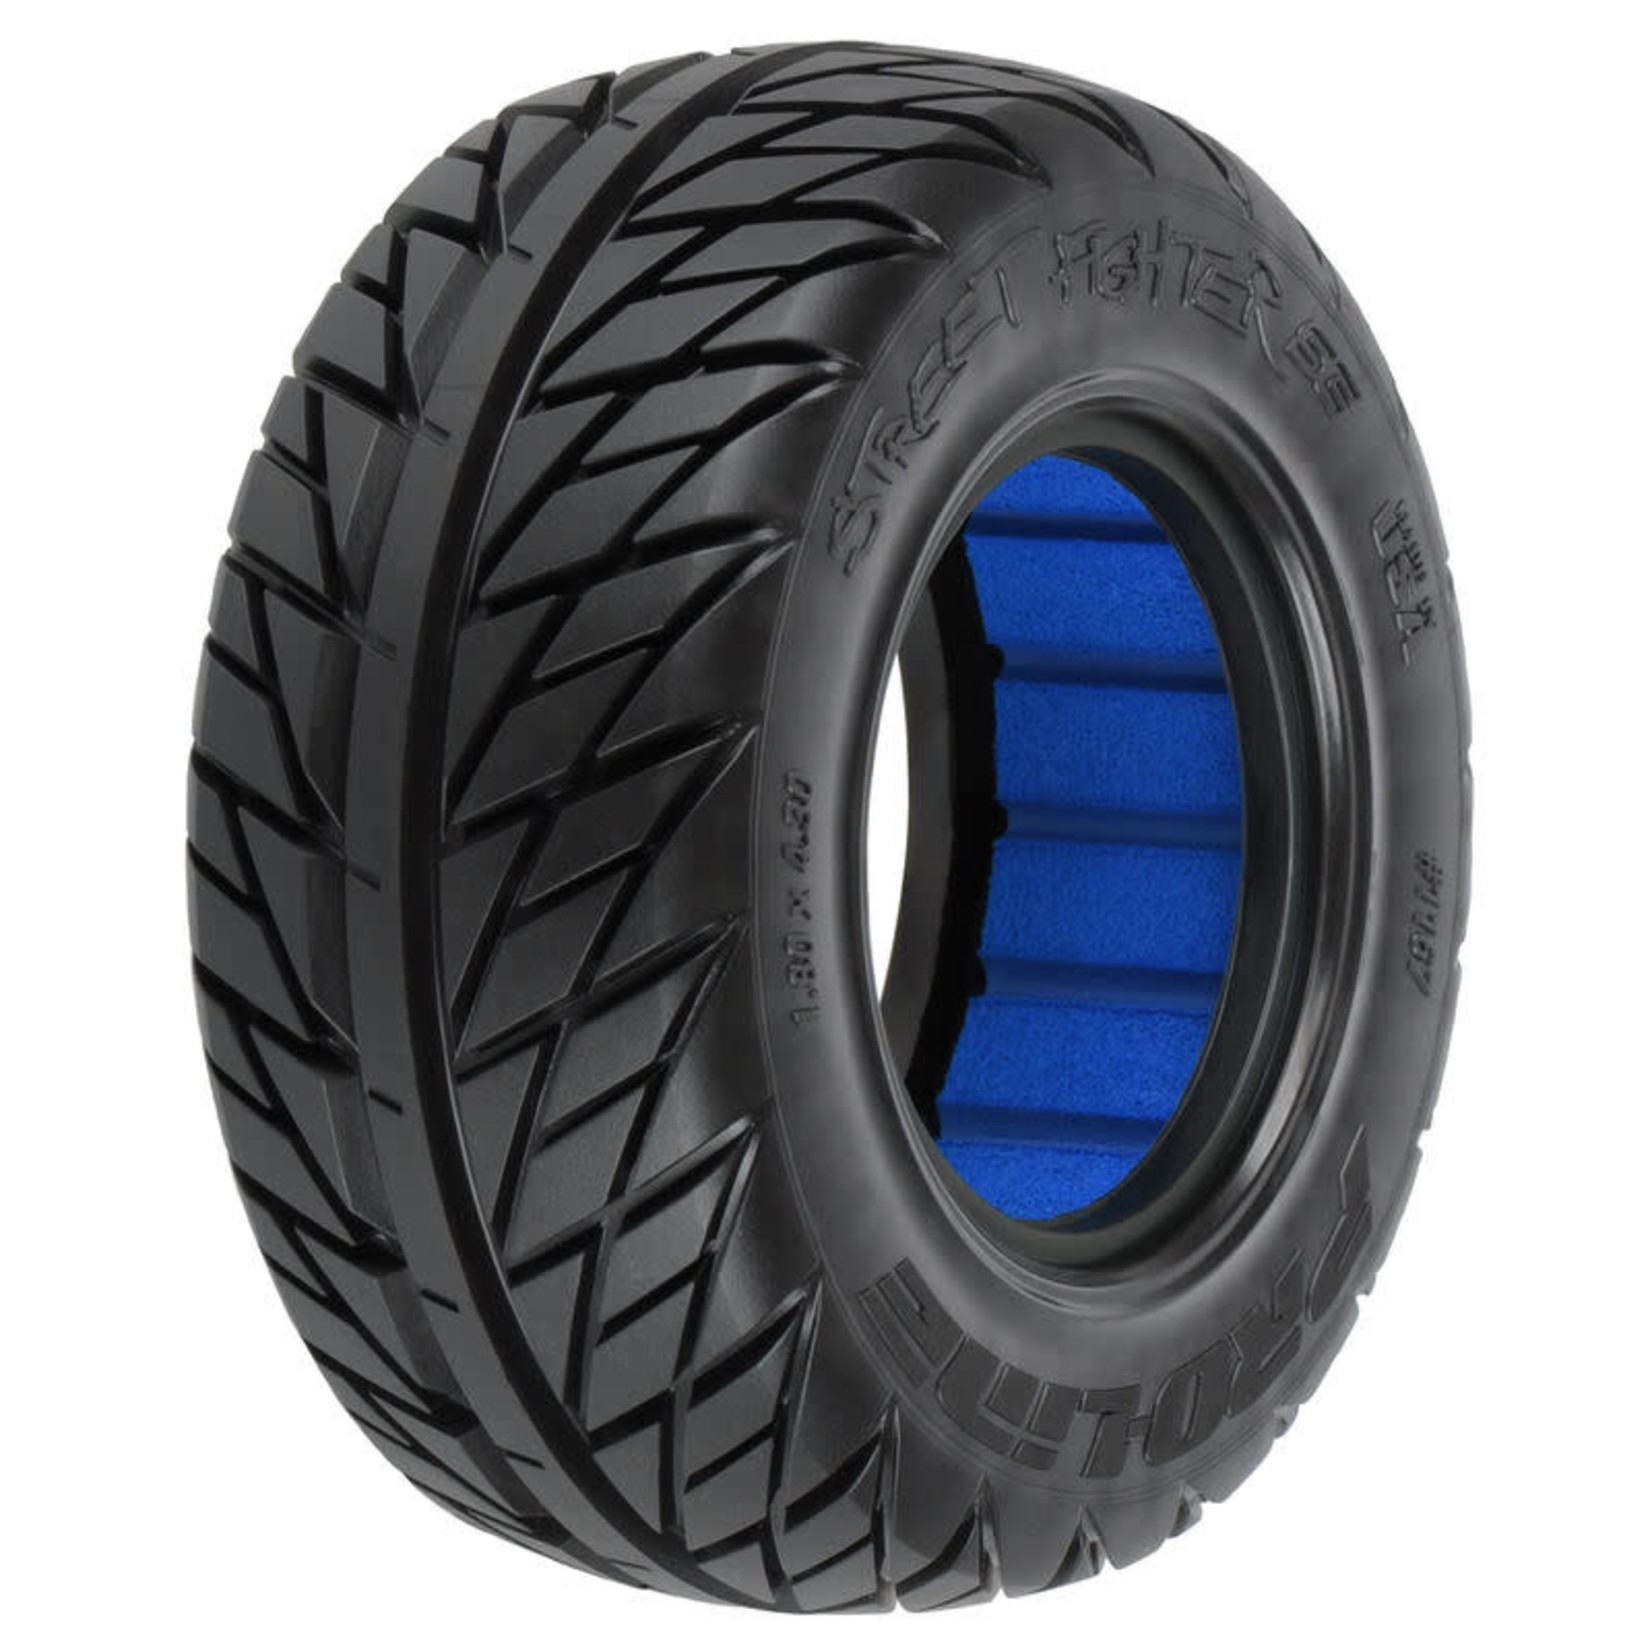 Pro-line Racing PRO116701 Pro-Line 1/10 Street Fighter M2 Front/Rear 2.2"/3.0" Short Course Tires (2)